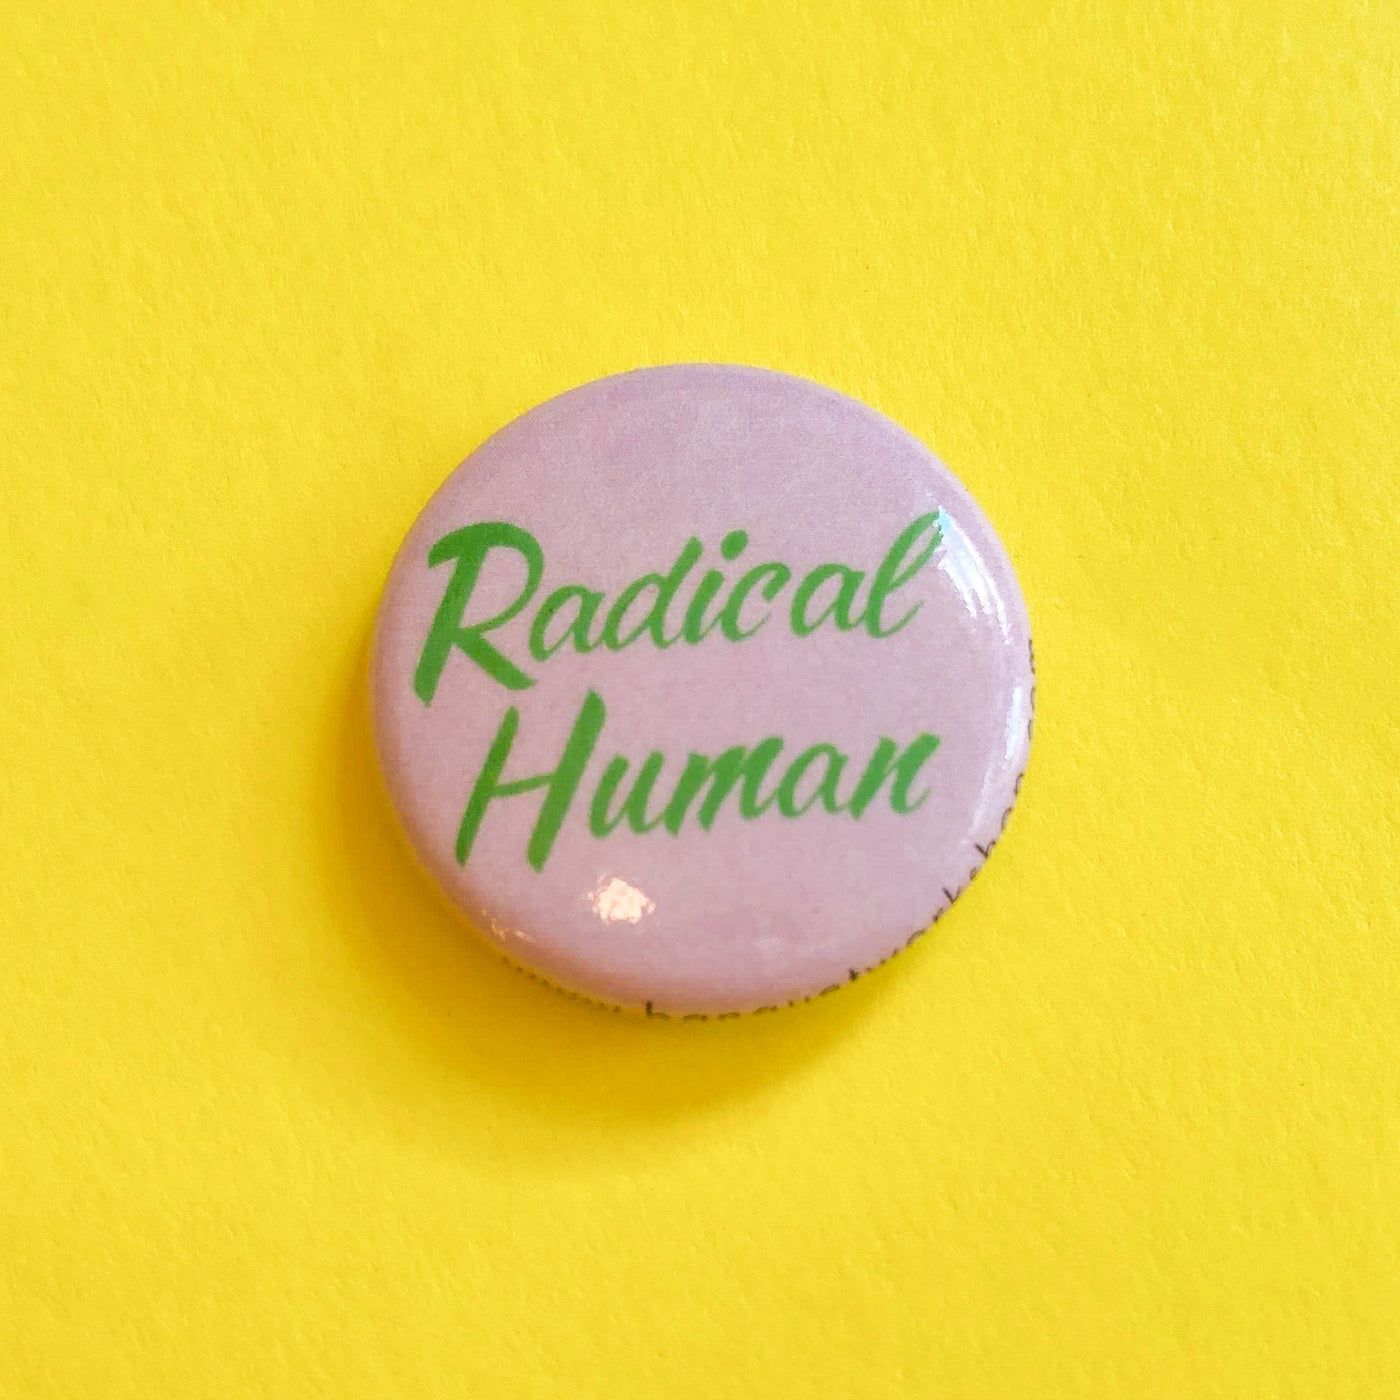 Banquet Workshop 1 inch button which says "Radical Human"